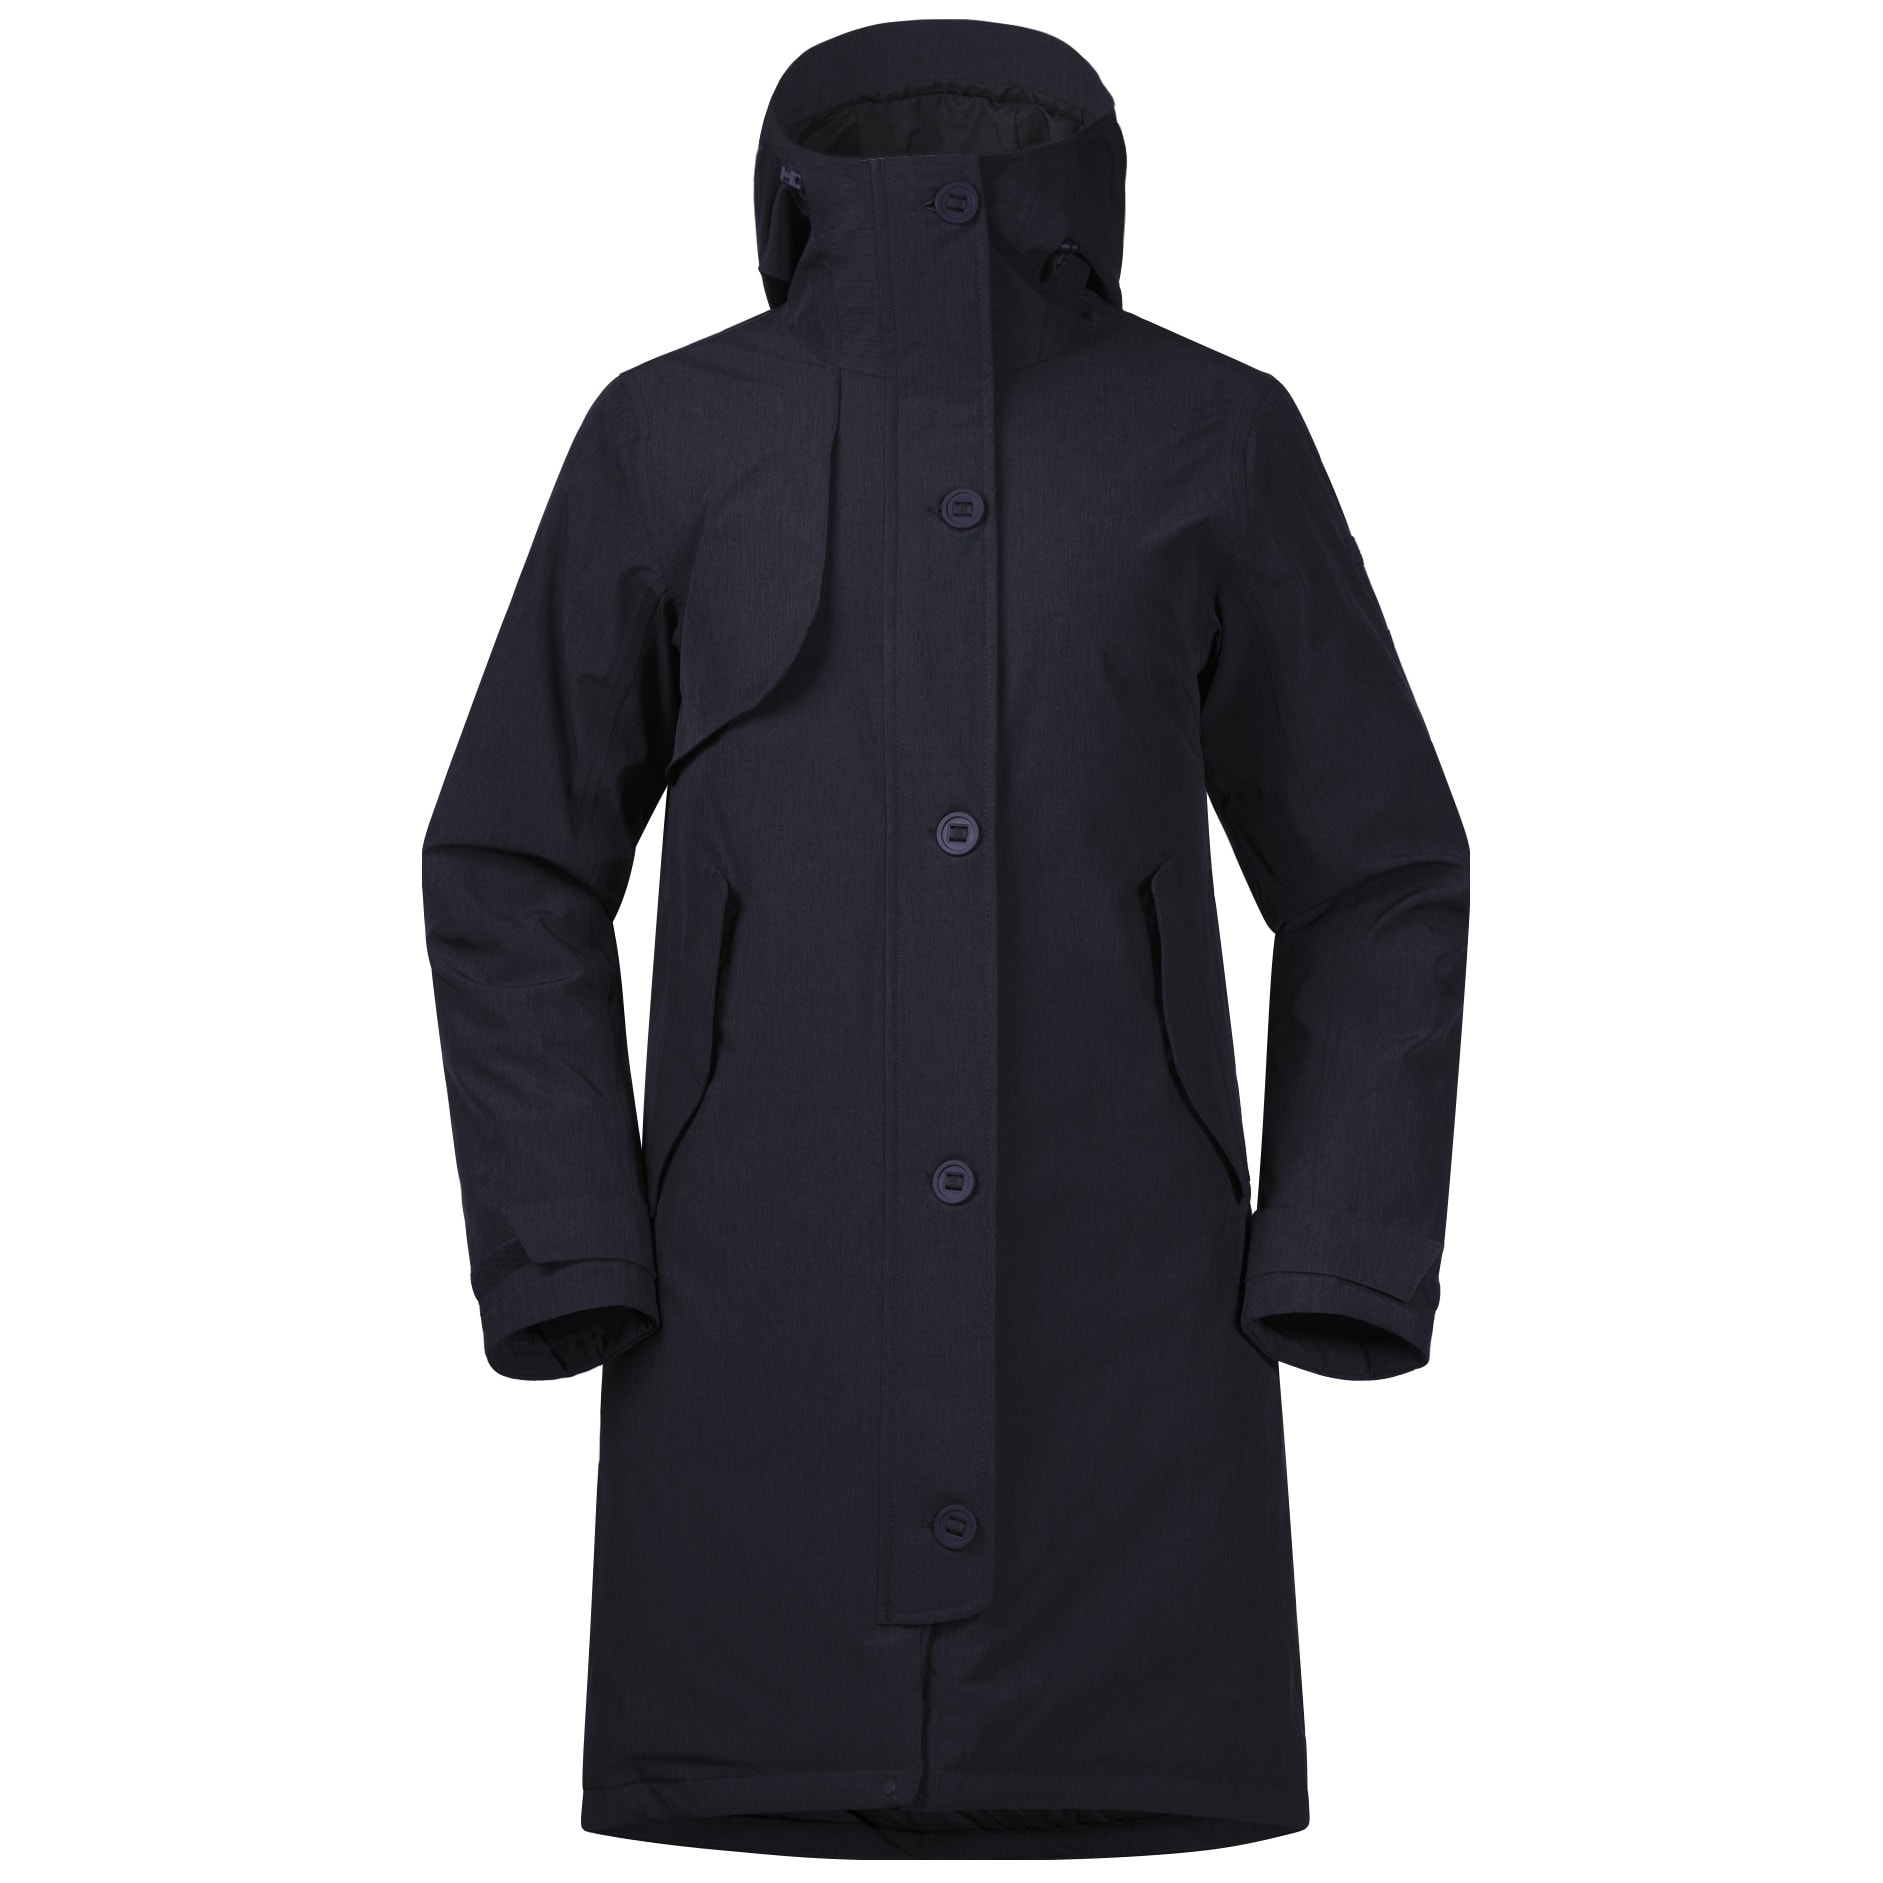 Buy Bergans Women's Oslo Down Parka from Outnorth